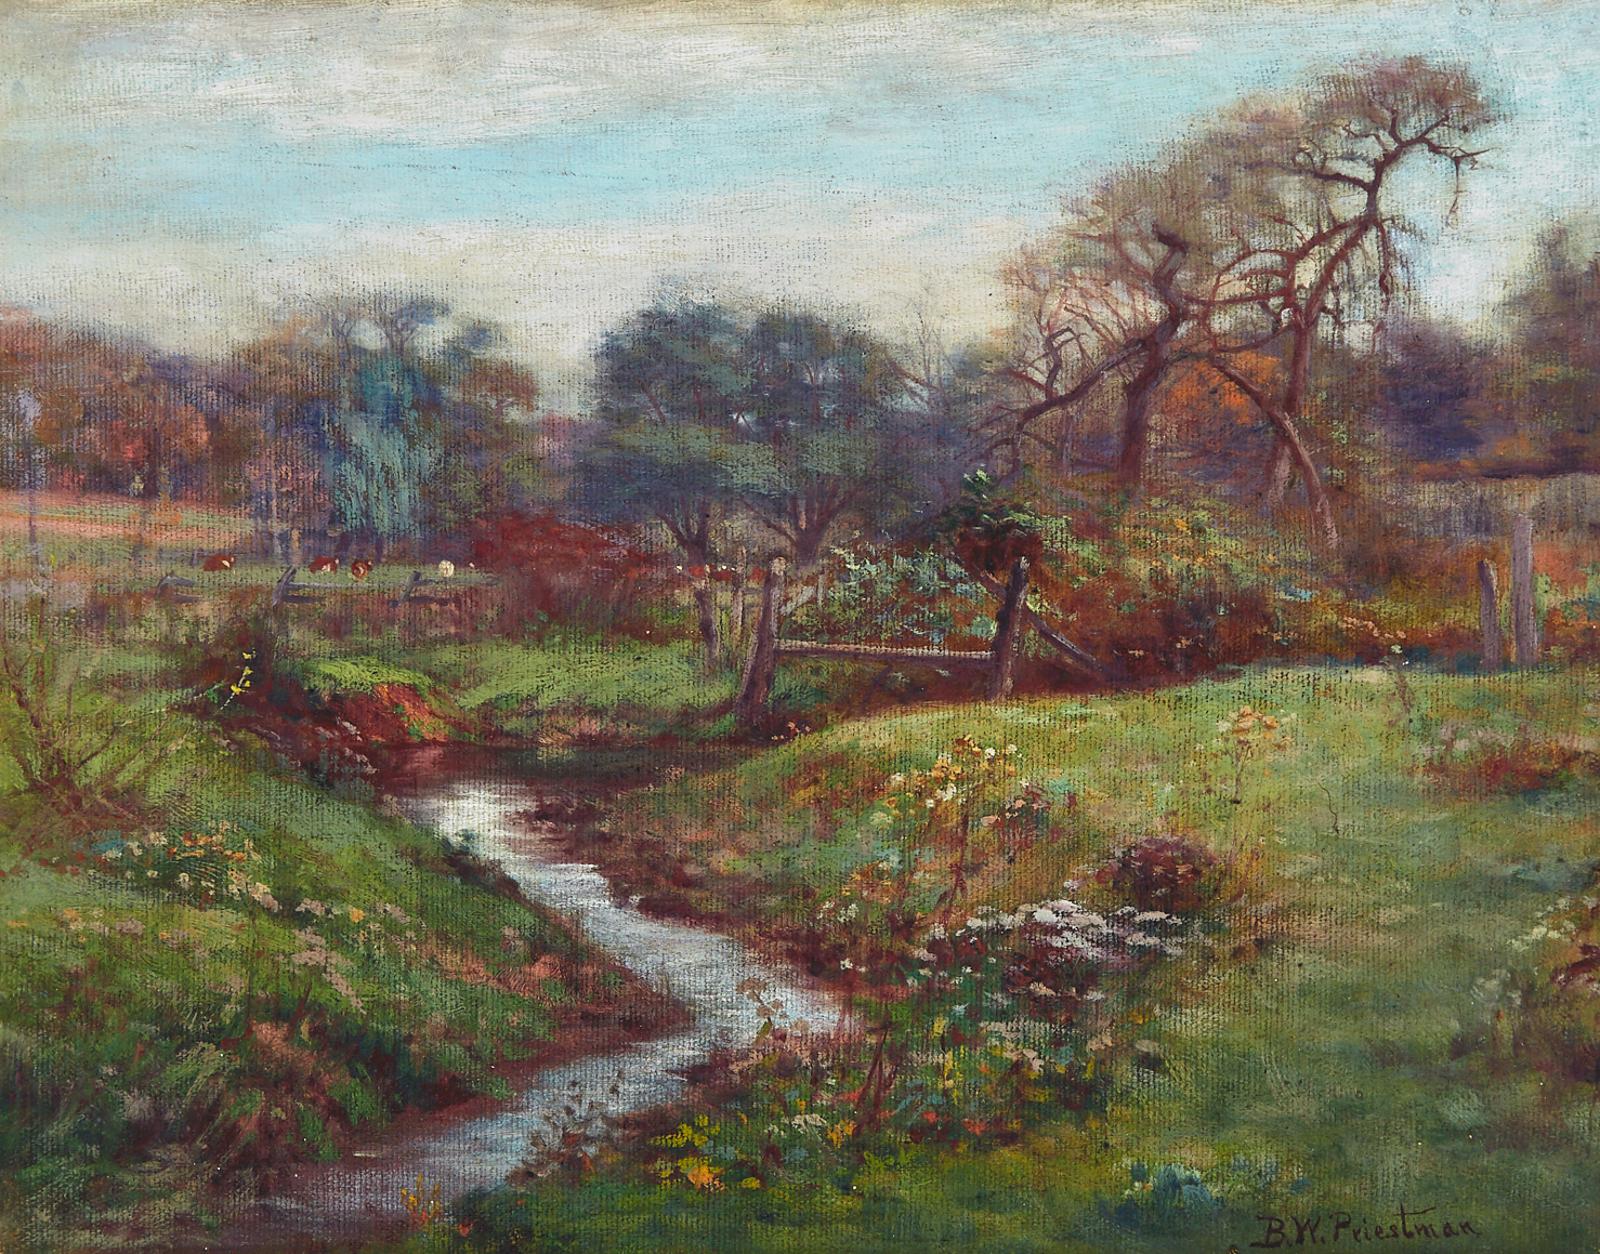 Bertram Walter Priestman (1868-1951) - Pastoral With A Stream And Cows Resting